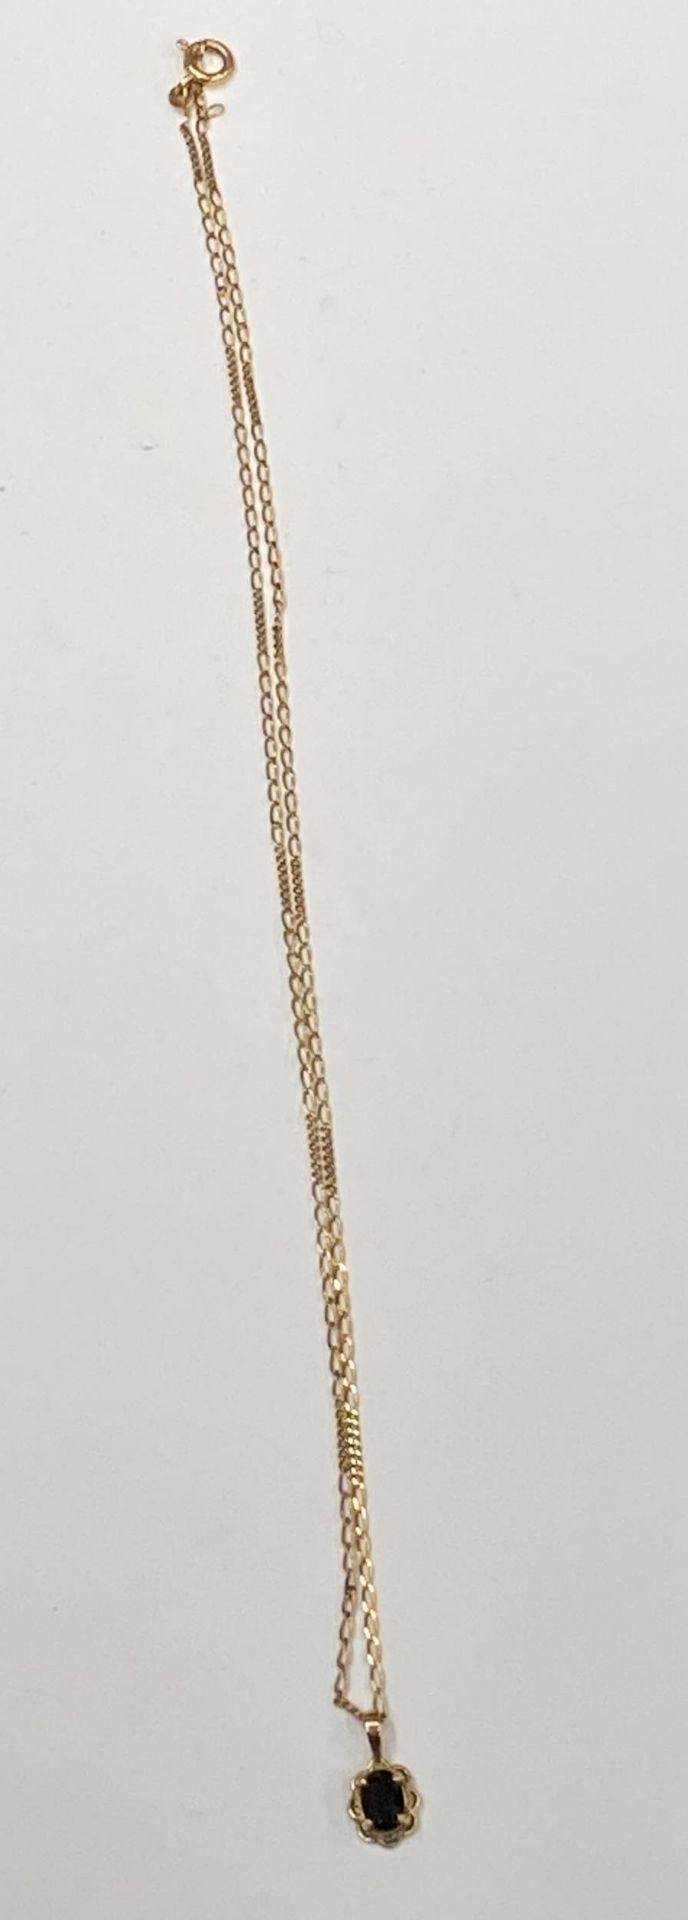 A 9CT YELLOW GOLD NECKLACE WITH SAPPHIRE STONE PENDANT, TOTAL WEIGHT 2.58G